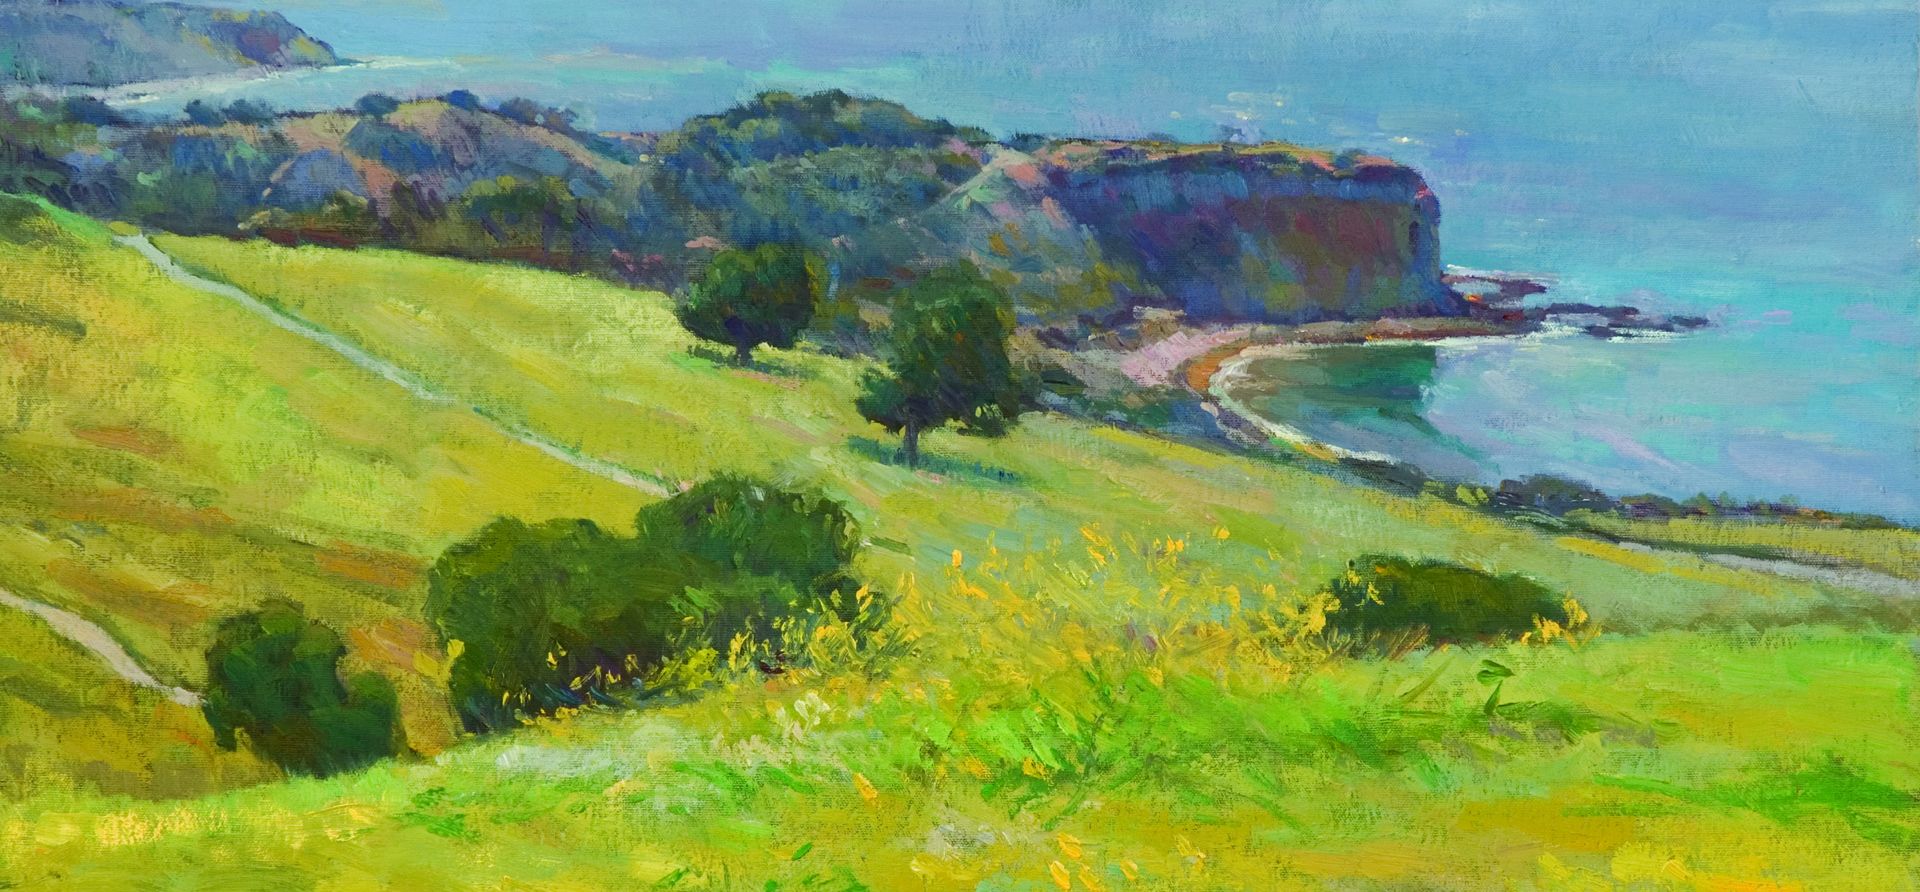 A Painting Of A Green Hillside